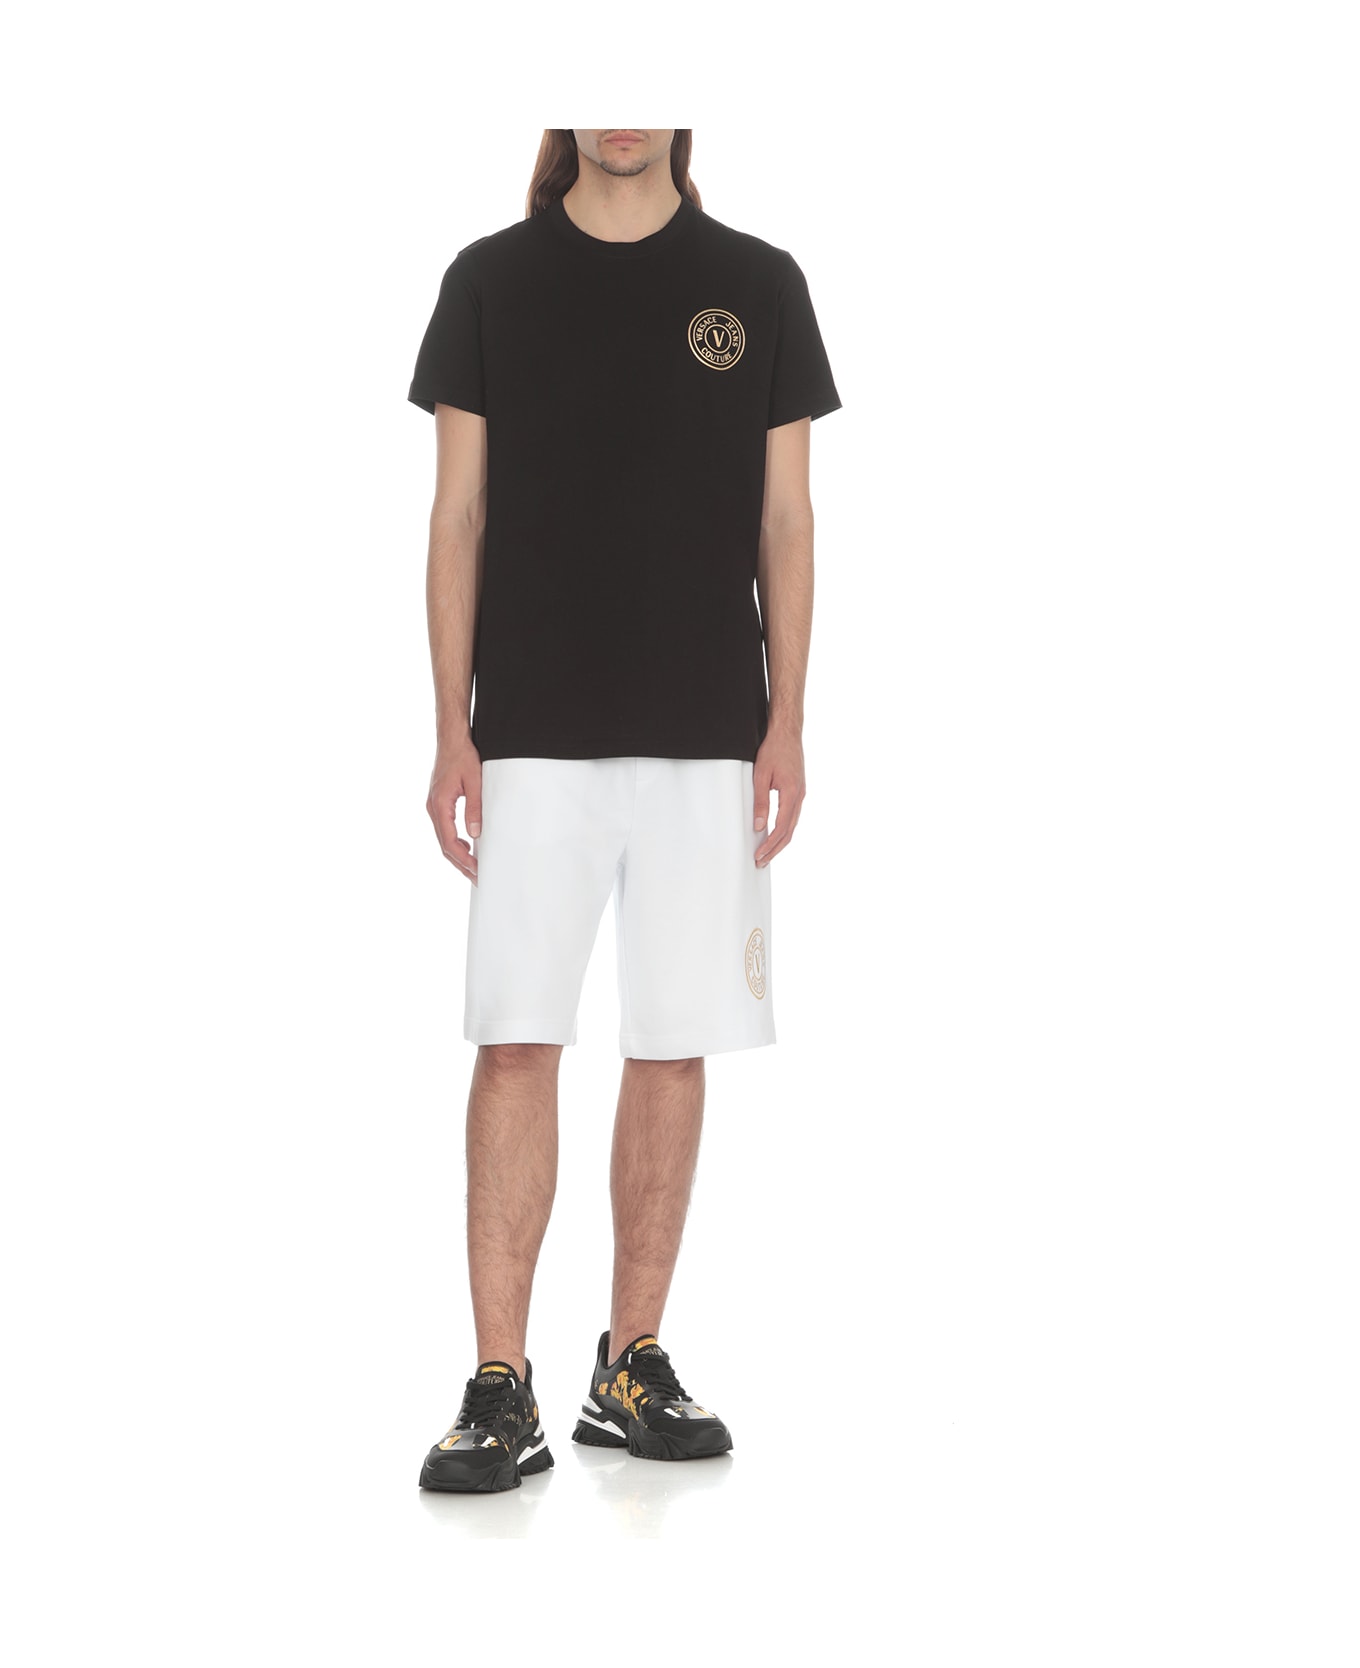 Versace Jeans Couture Bermuda Shorts With Vemblem Logo - White